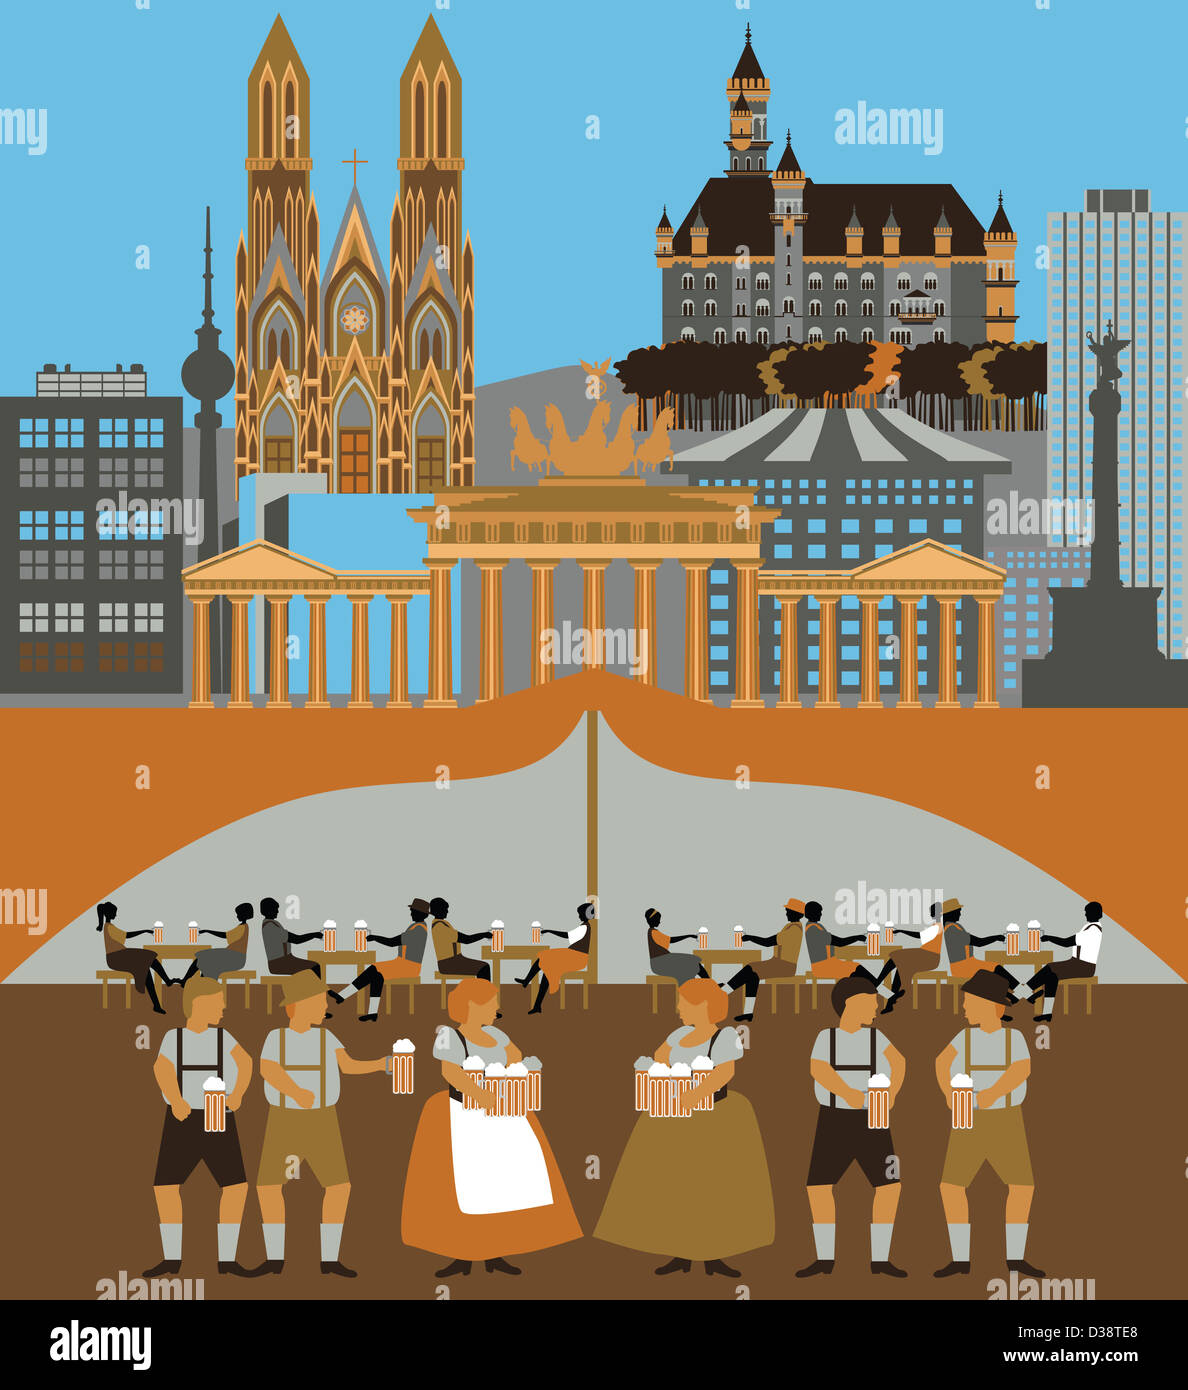 Illustration showing top tourist attractions in Germany Stock Photo